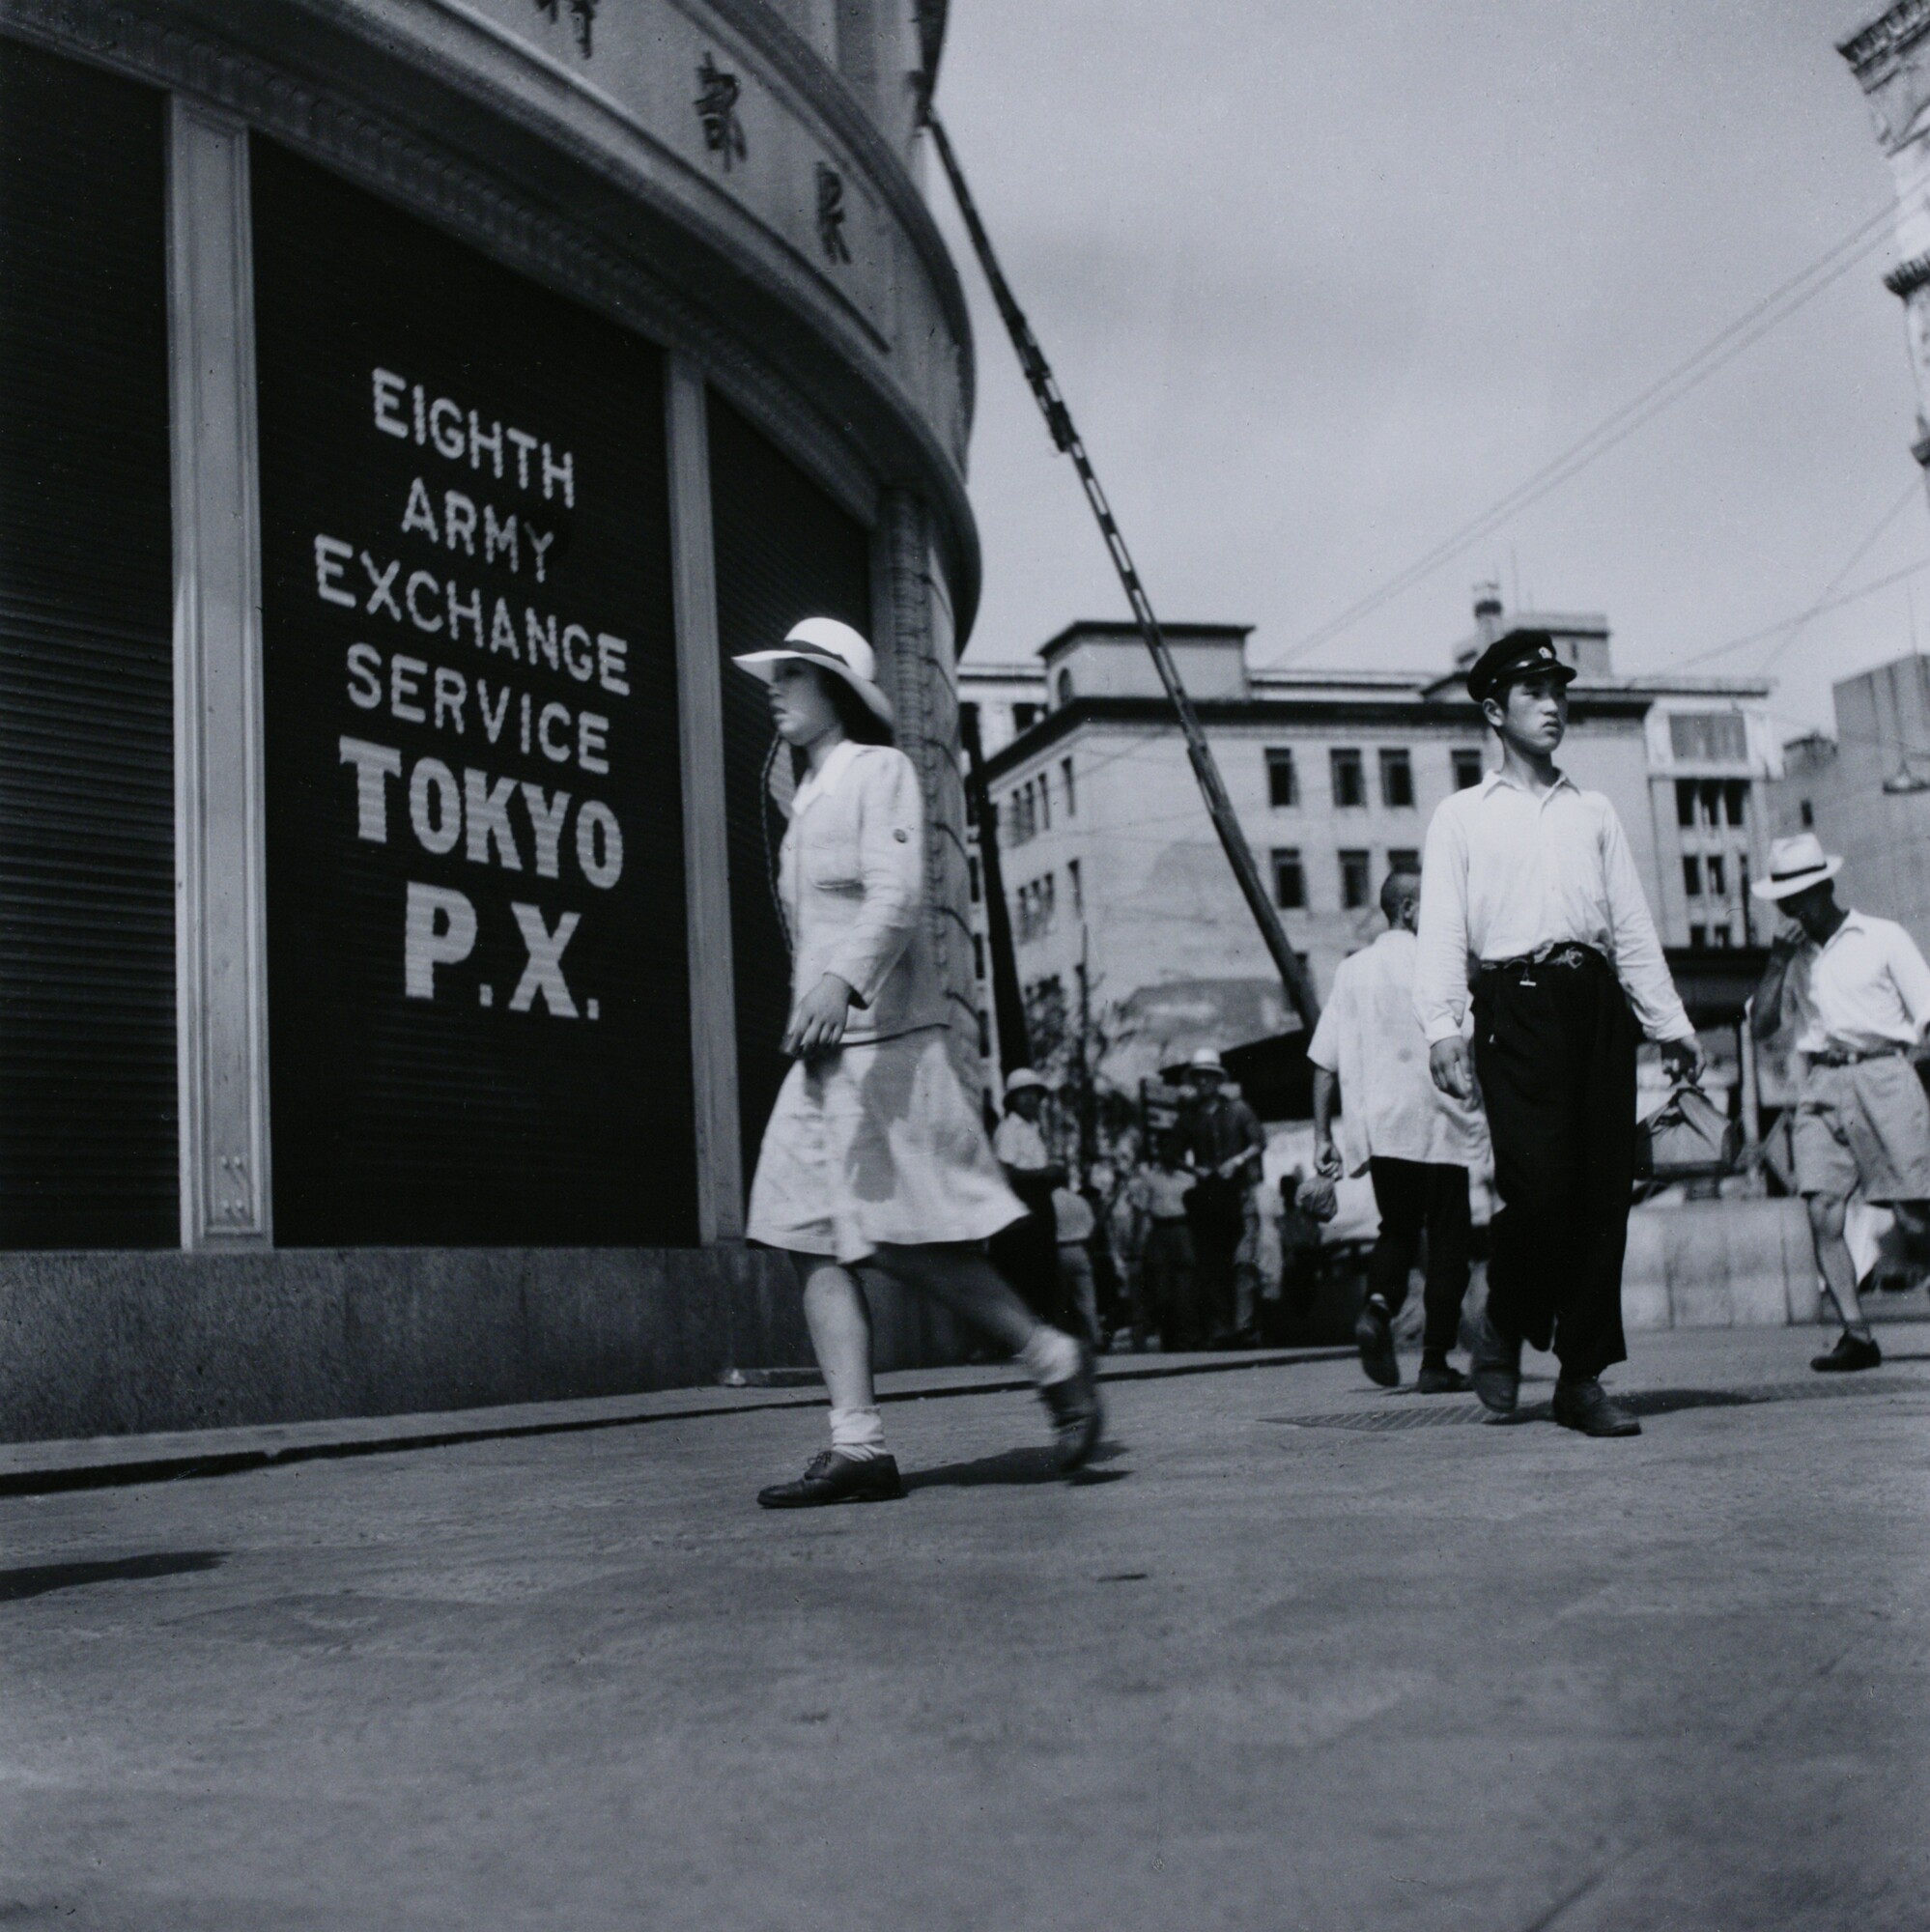 A woman walking down city street right to left with light-colored hat, jacket, and dress. Three men behind her on the right of the composition looking in different directions. The first man is standing looking off to the right in a dark hat, light shirt, and dark pants. Another man is behind him on the right looking down with a light-colored hat, shirt, and shorts. Another man is behind the first man to the left in a light-colored shirt and dark pants. City buildings in the background with other people in the distance.